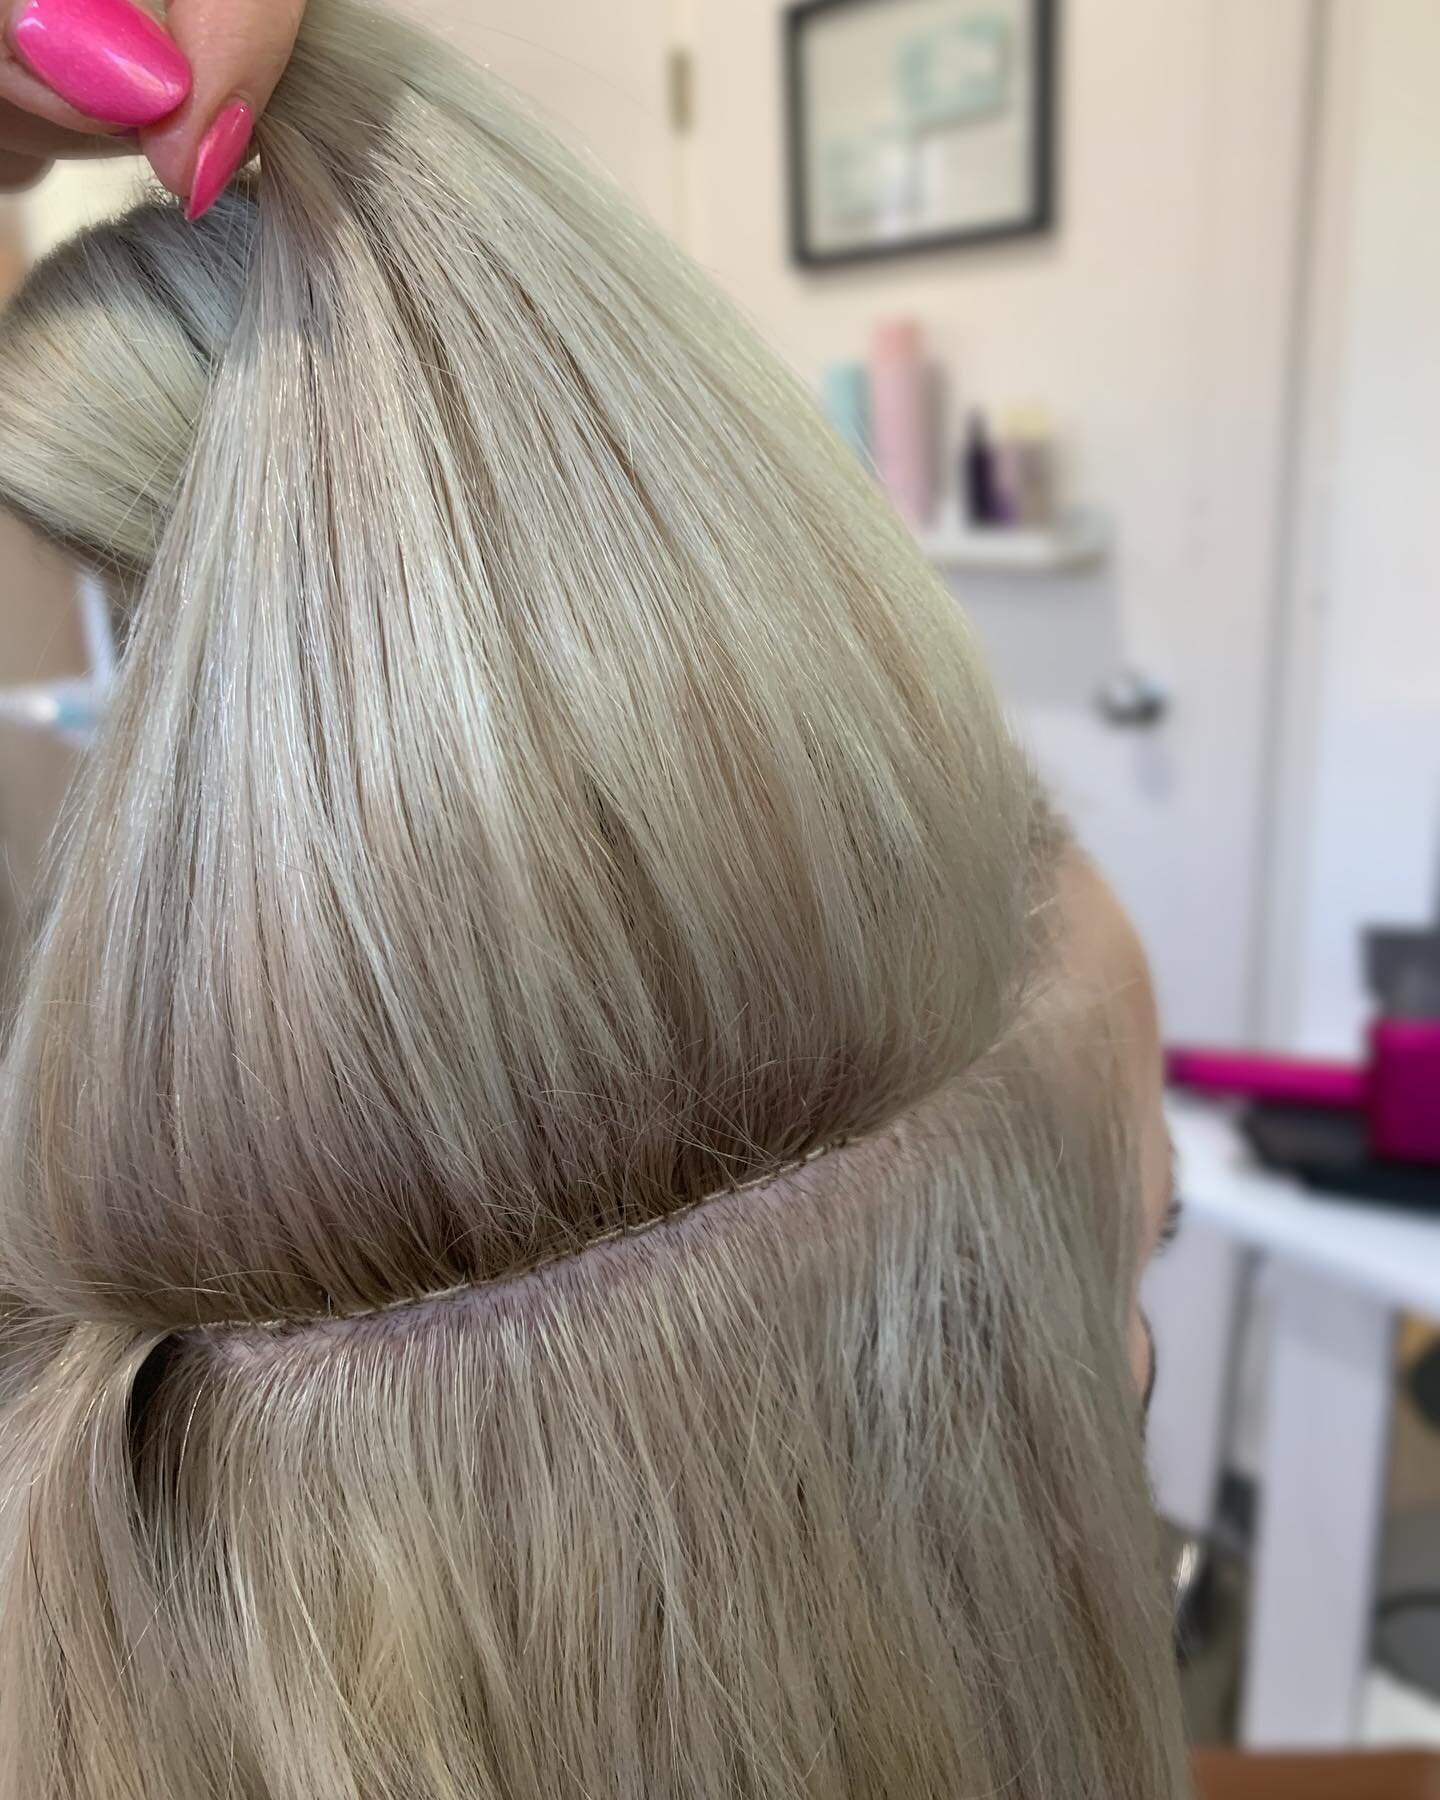 Pretty seamless, right?! I&rsquo;m here to tell you @invisiblebeadextensions is the BEST beaded row install method out there! Who wants their dream hair? 🙌